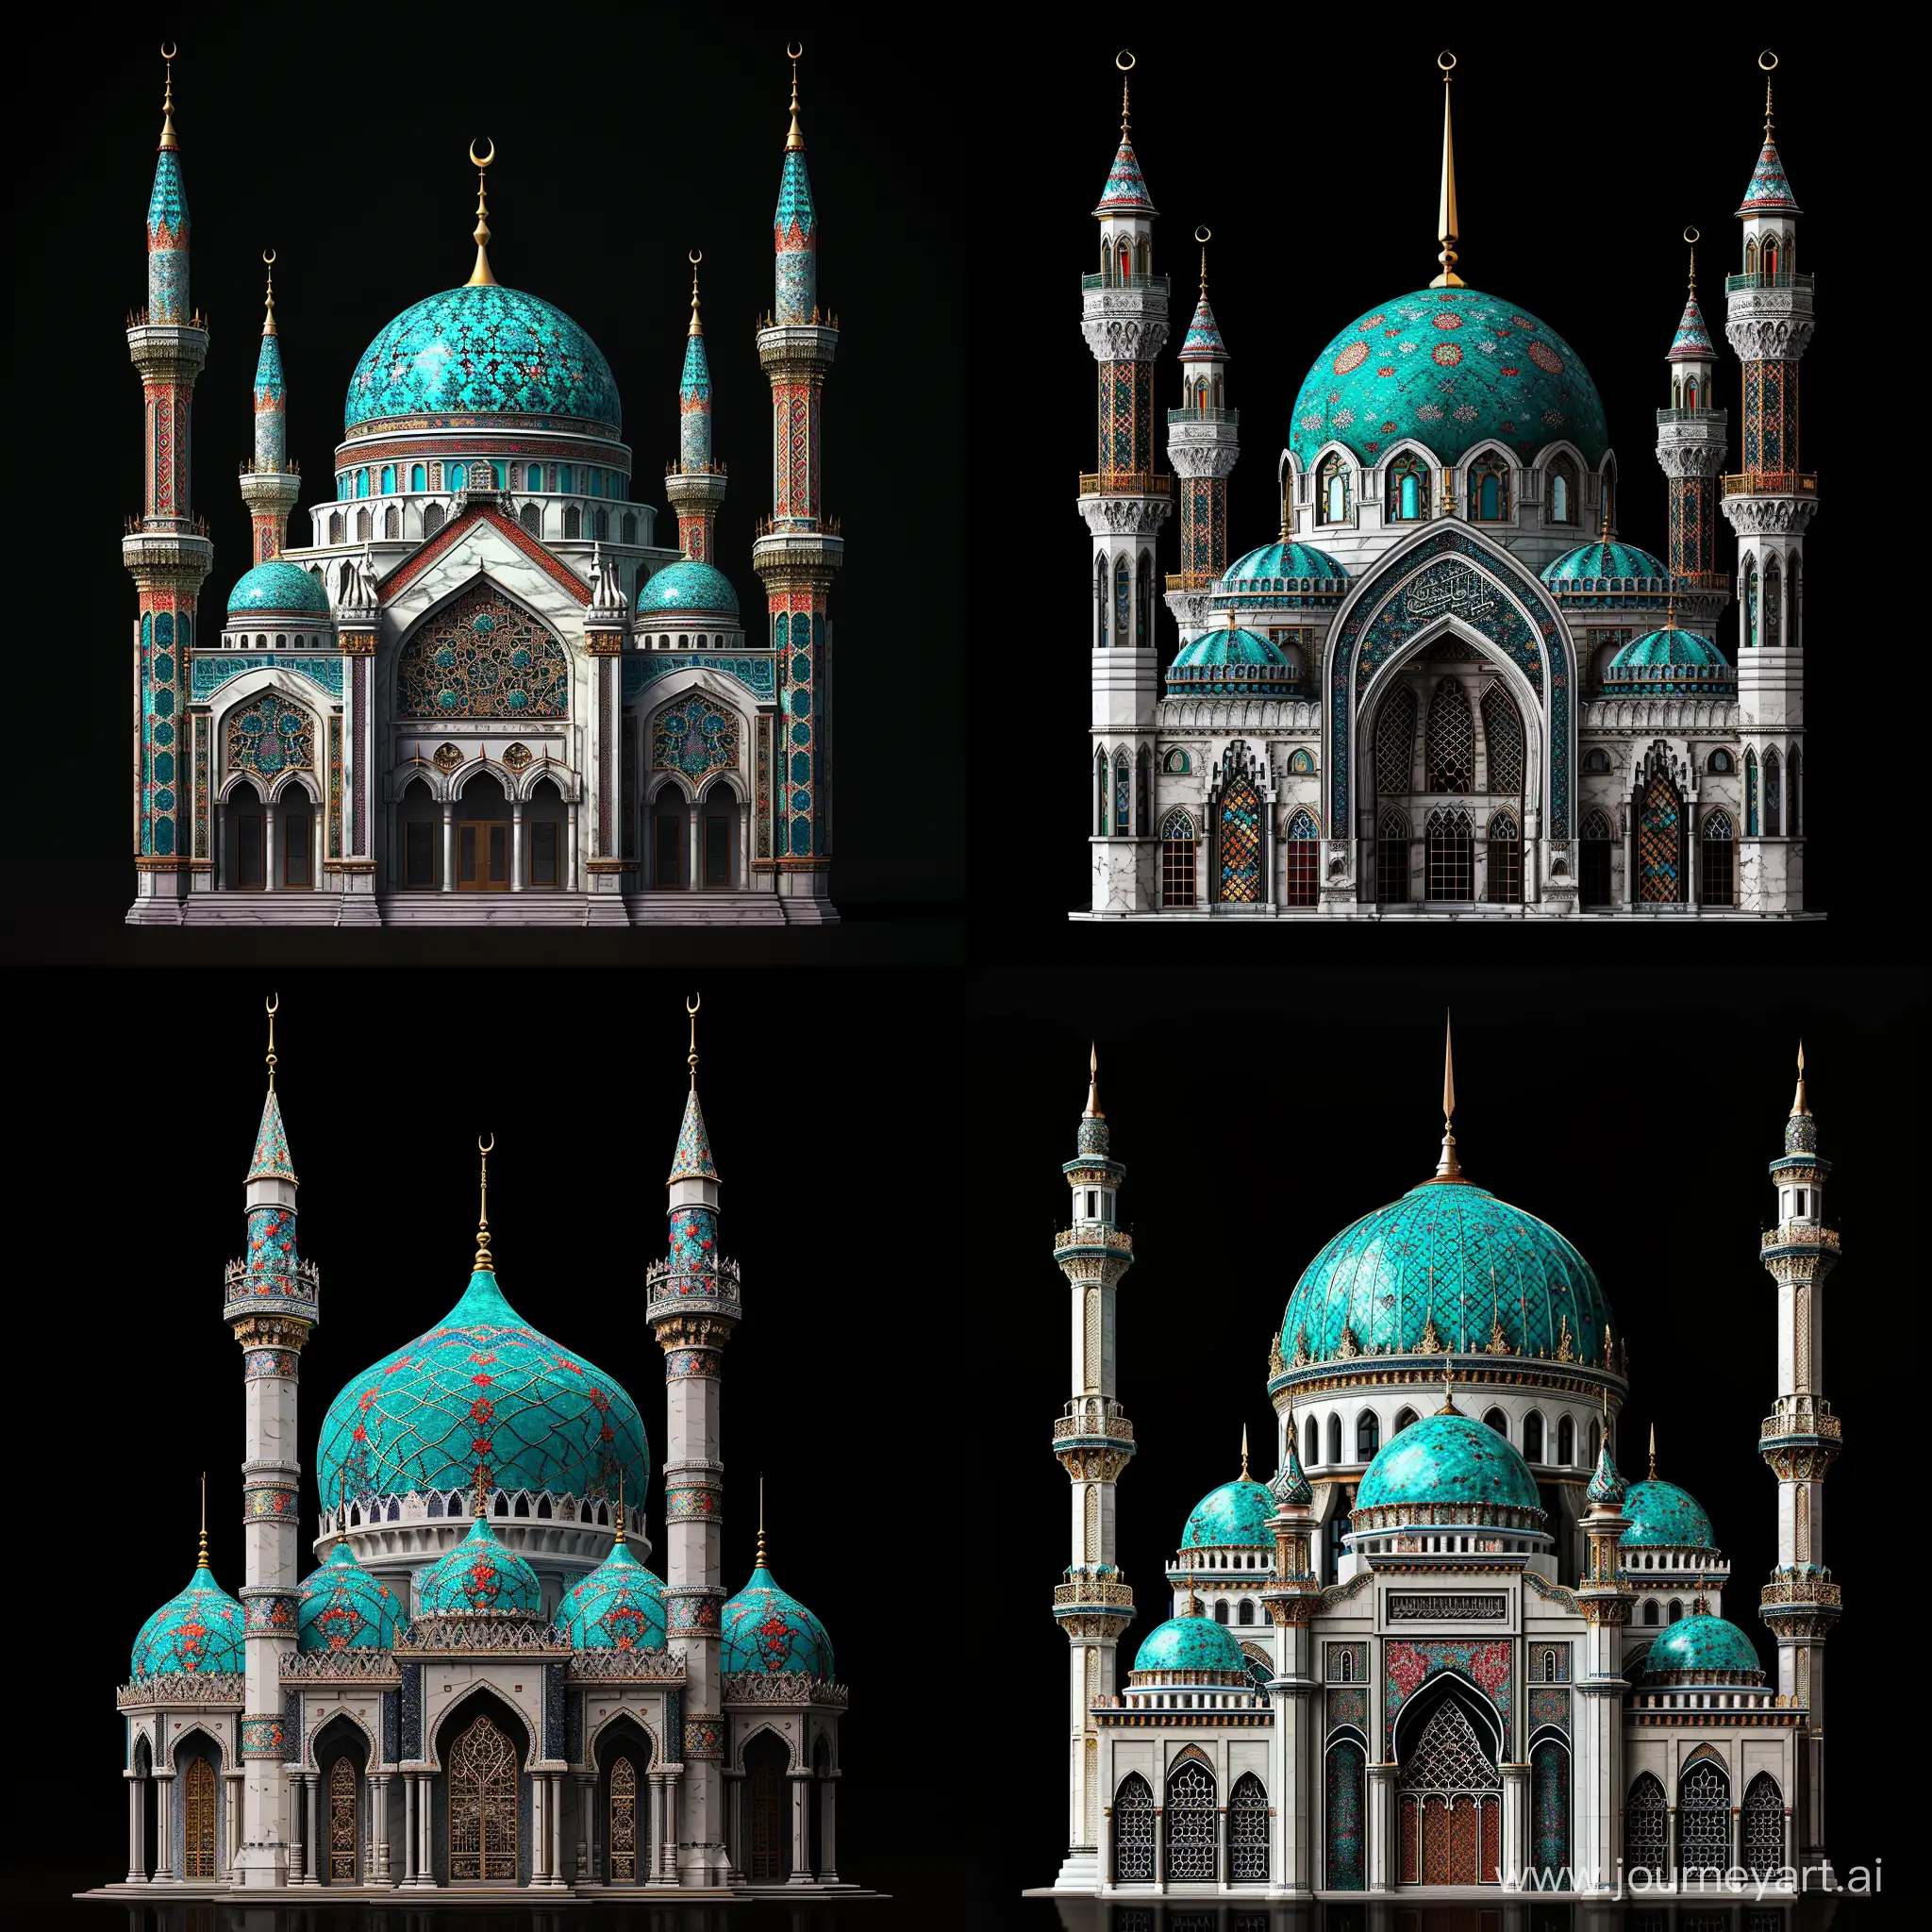 3d rendered: A highly ornamented Tall Umayyad architecture mosque, turquoise tiled timurid dome, thin decorative spires and minarets, White black caramel marbled facade, blue red finely thin floral Persian tiles on spandrels, islamic arabesque openwork lattice windows, shiny gold finial, multi storey, black background, full view, front view, symmetric